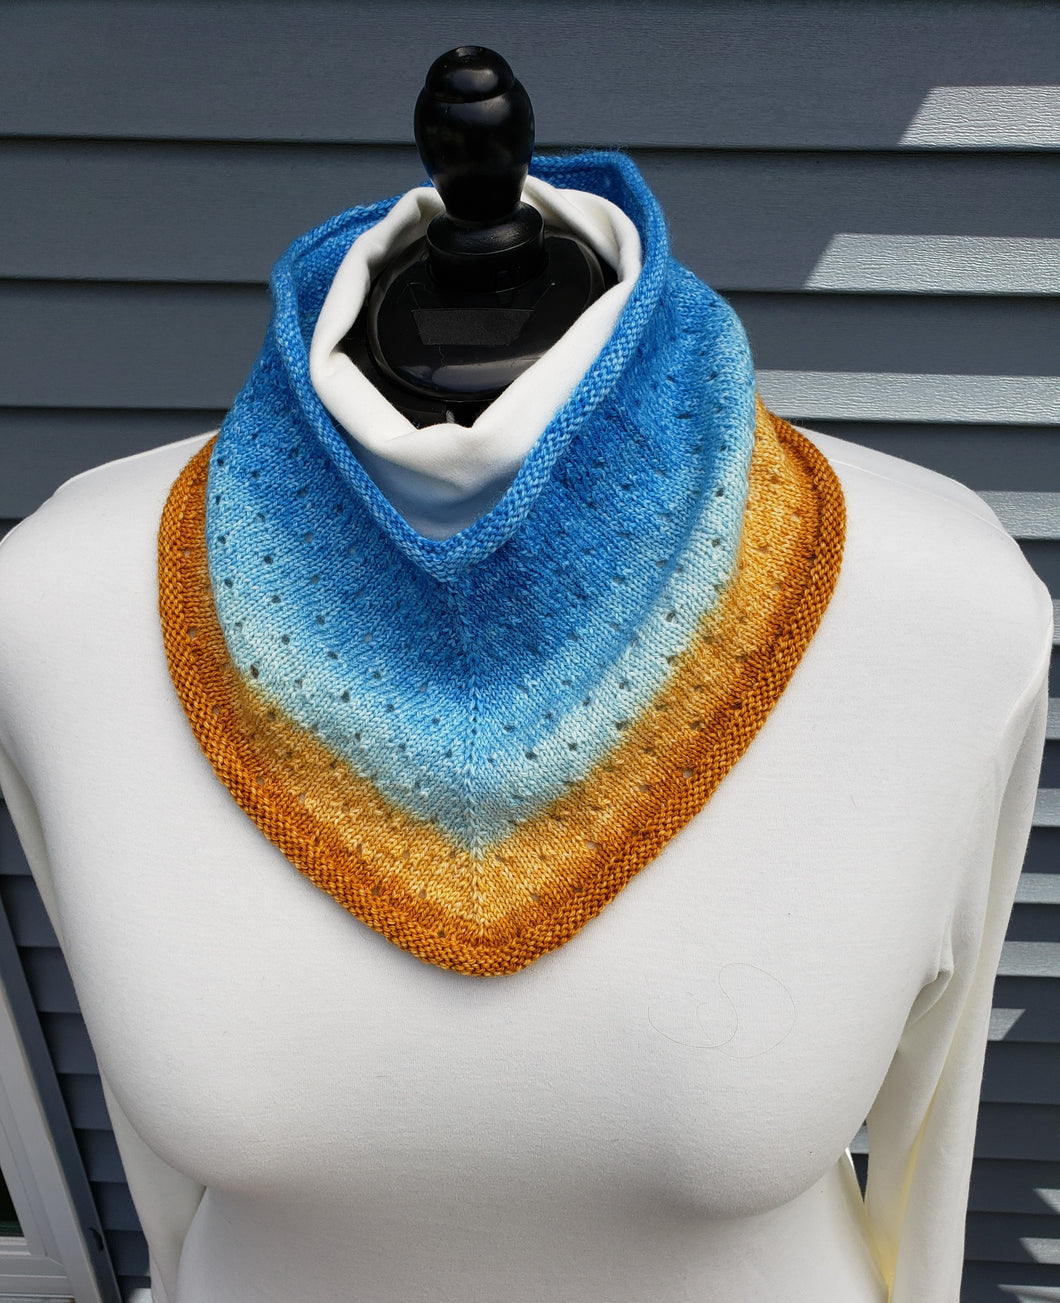 Cowl with eyelets in a gradient yarn from Blue at top to lighter blues then yellows and orange at bottom.